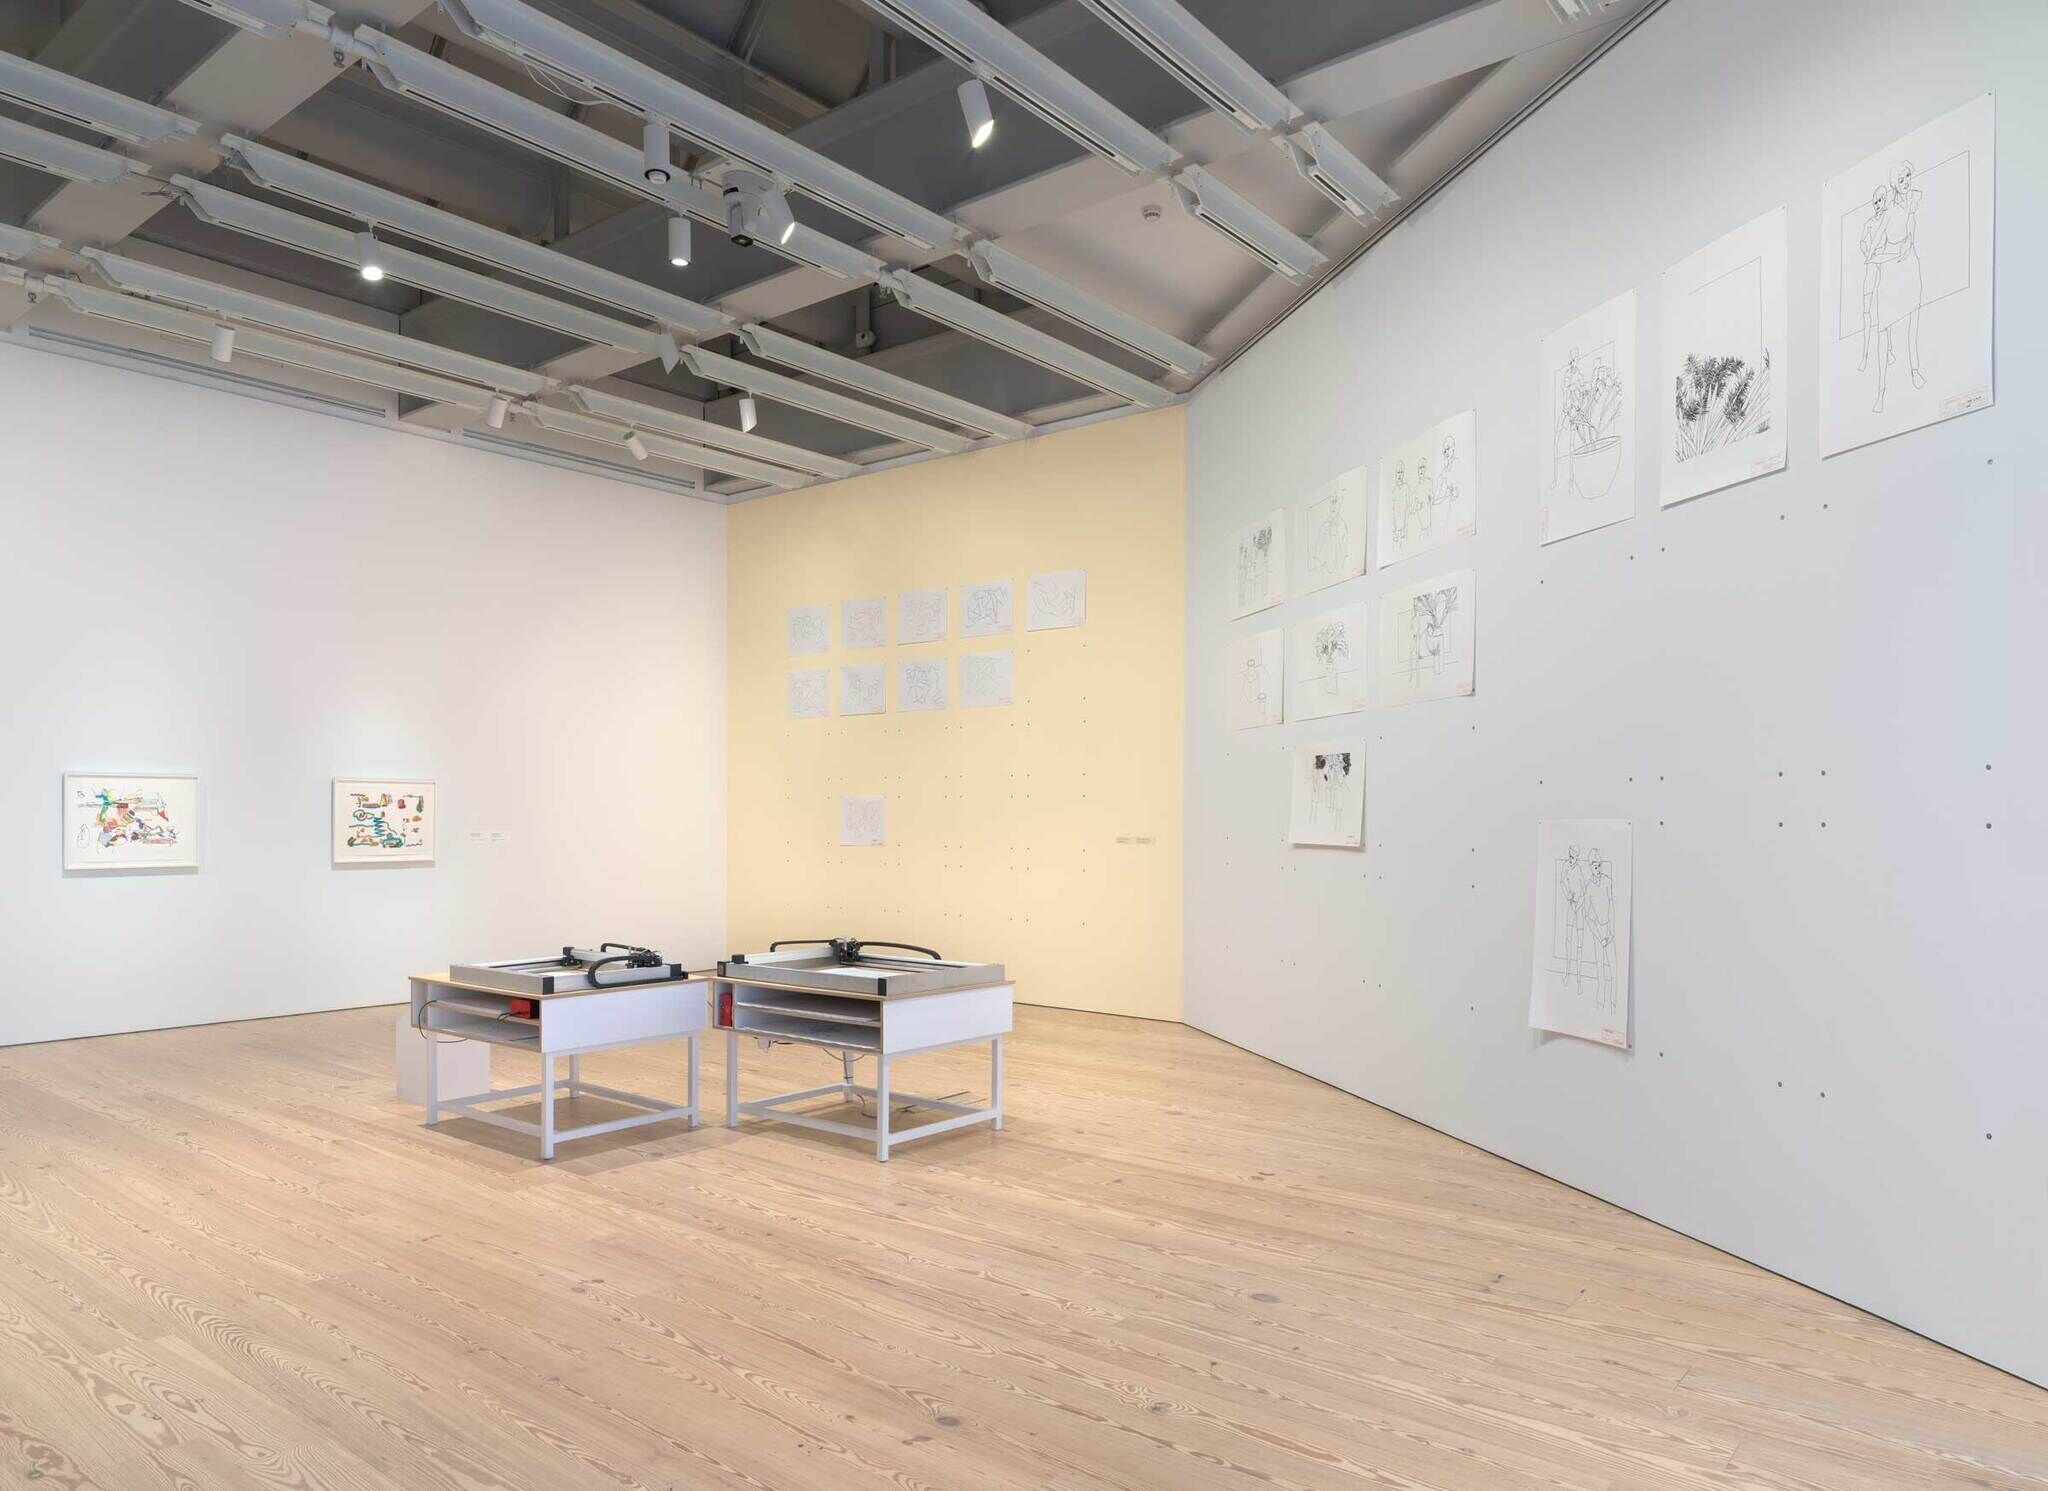 Modern art gallery interior with sketches on walls and two plotters drawing with a sharpie in the center.